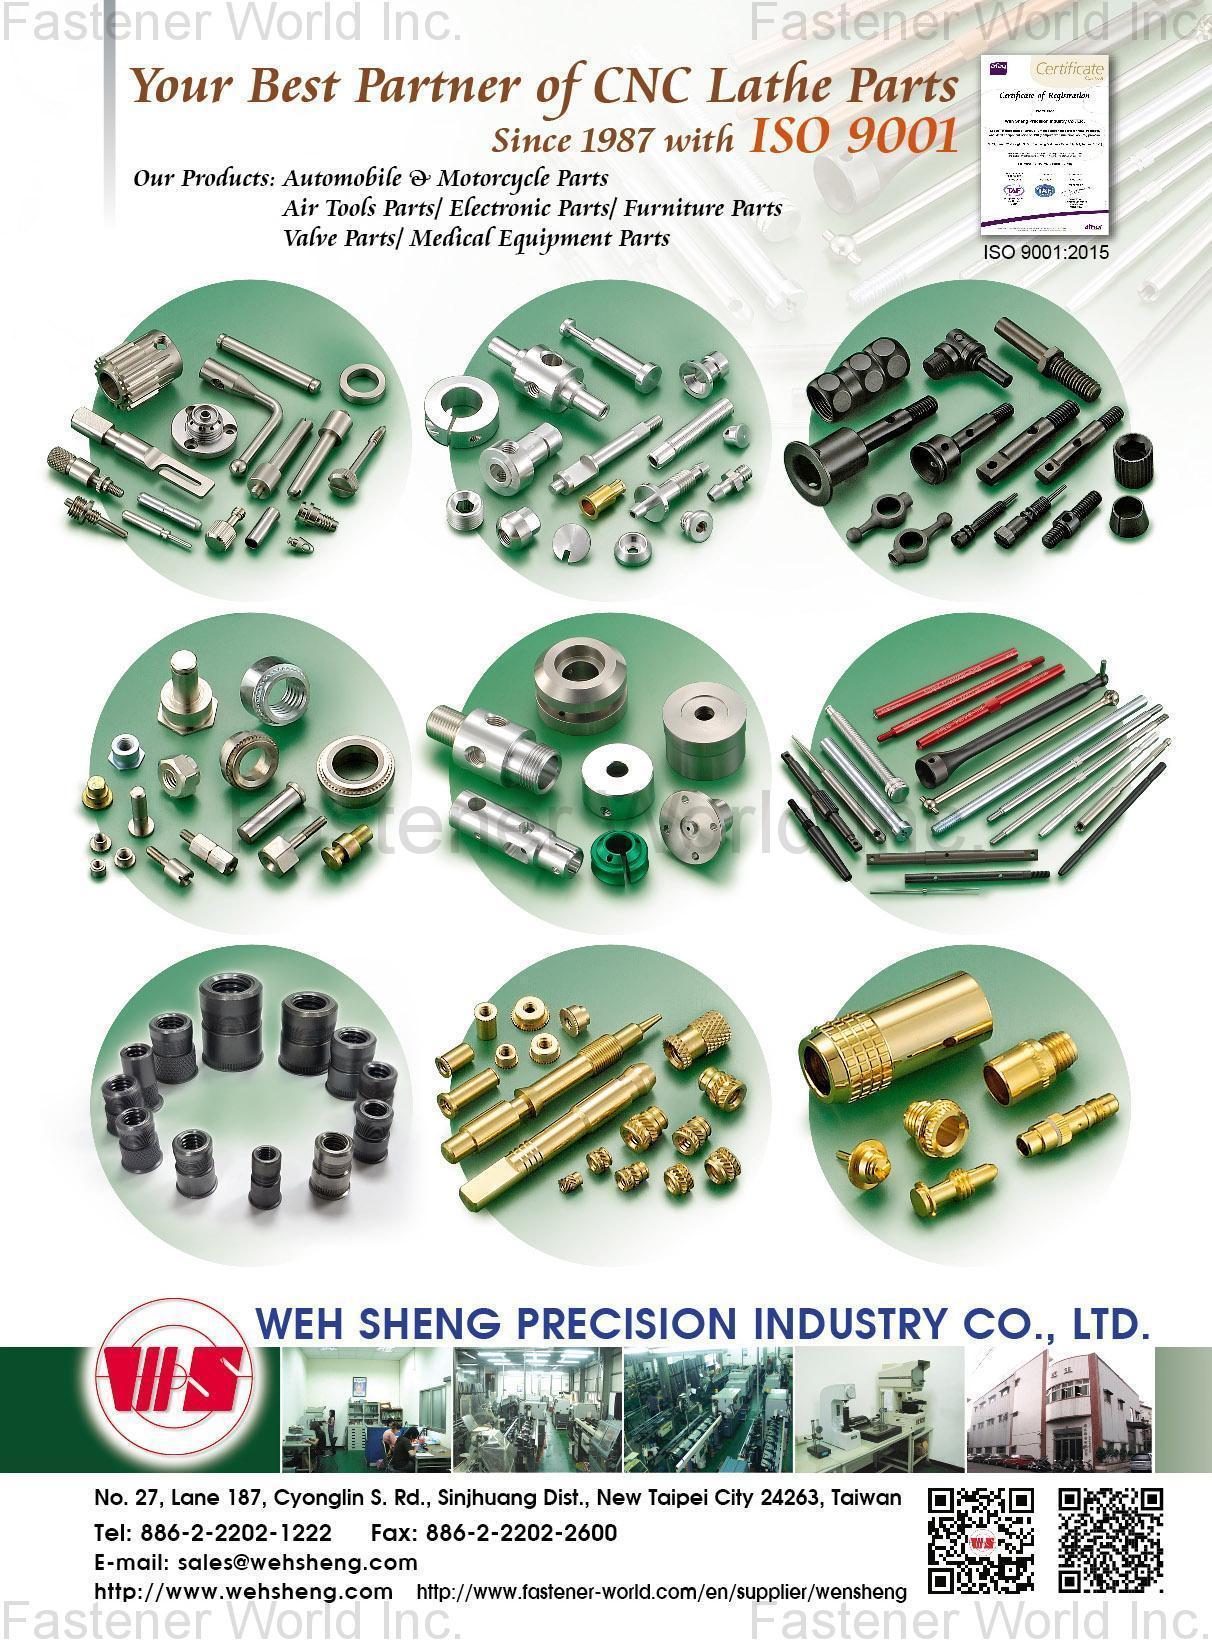 WEH SHENG PRECISION INDUSTRY CO., LTD. , Turning parts, CNC machining companies, Turned parts manufacturers,Precision turned parts manufacturer,CNC lathe parts,CNC turned part,Conduit fittings,CNC turned and machined parts,Industrial parts supplier,Custom cnc machining,Custom cnc machined parts,Precision machine shops,Precision machined components company,Brake line fitting,Taiwan turning parts , Automotive Parts